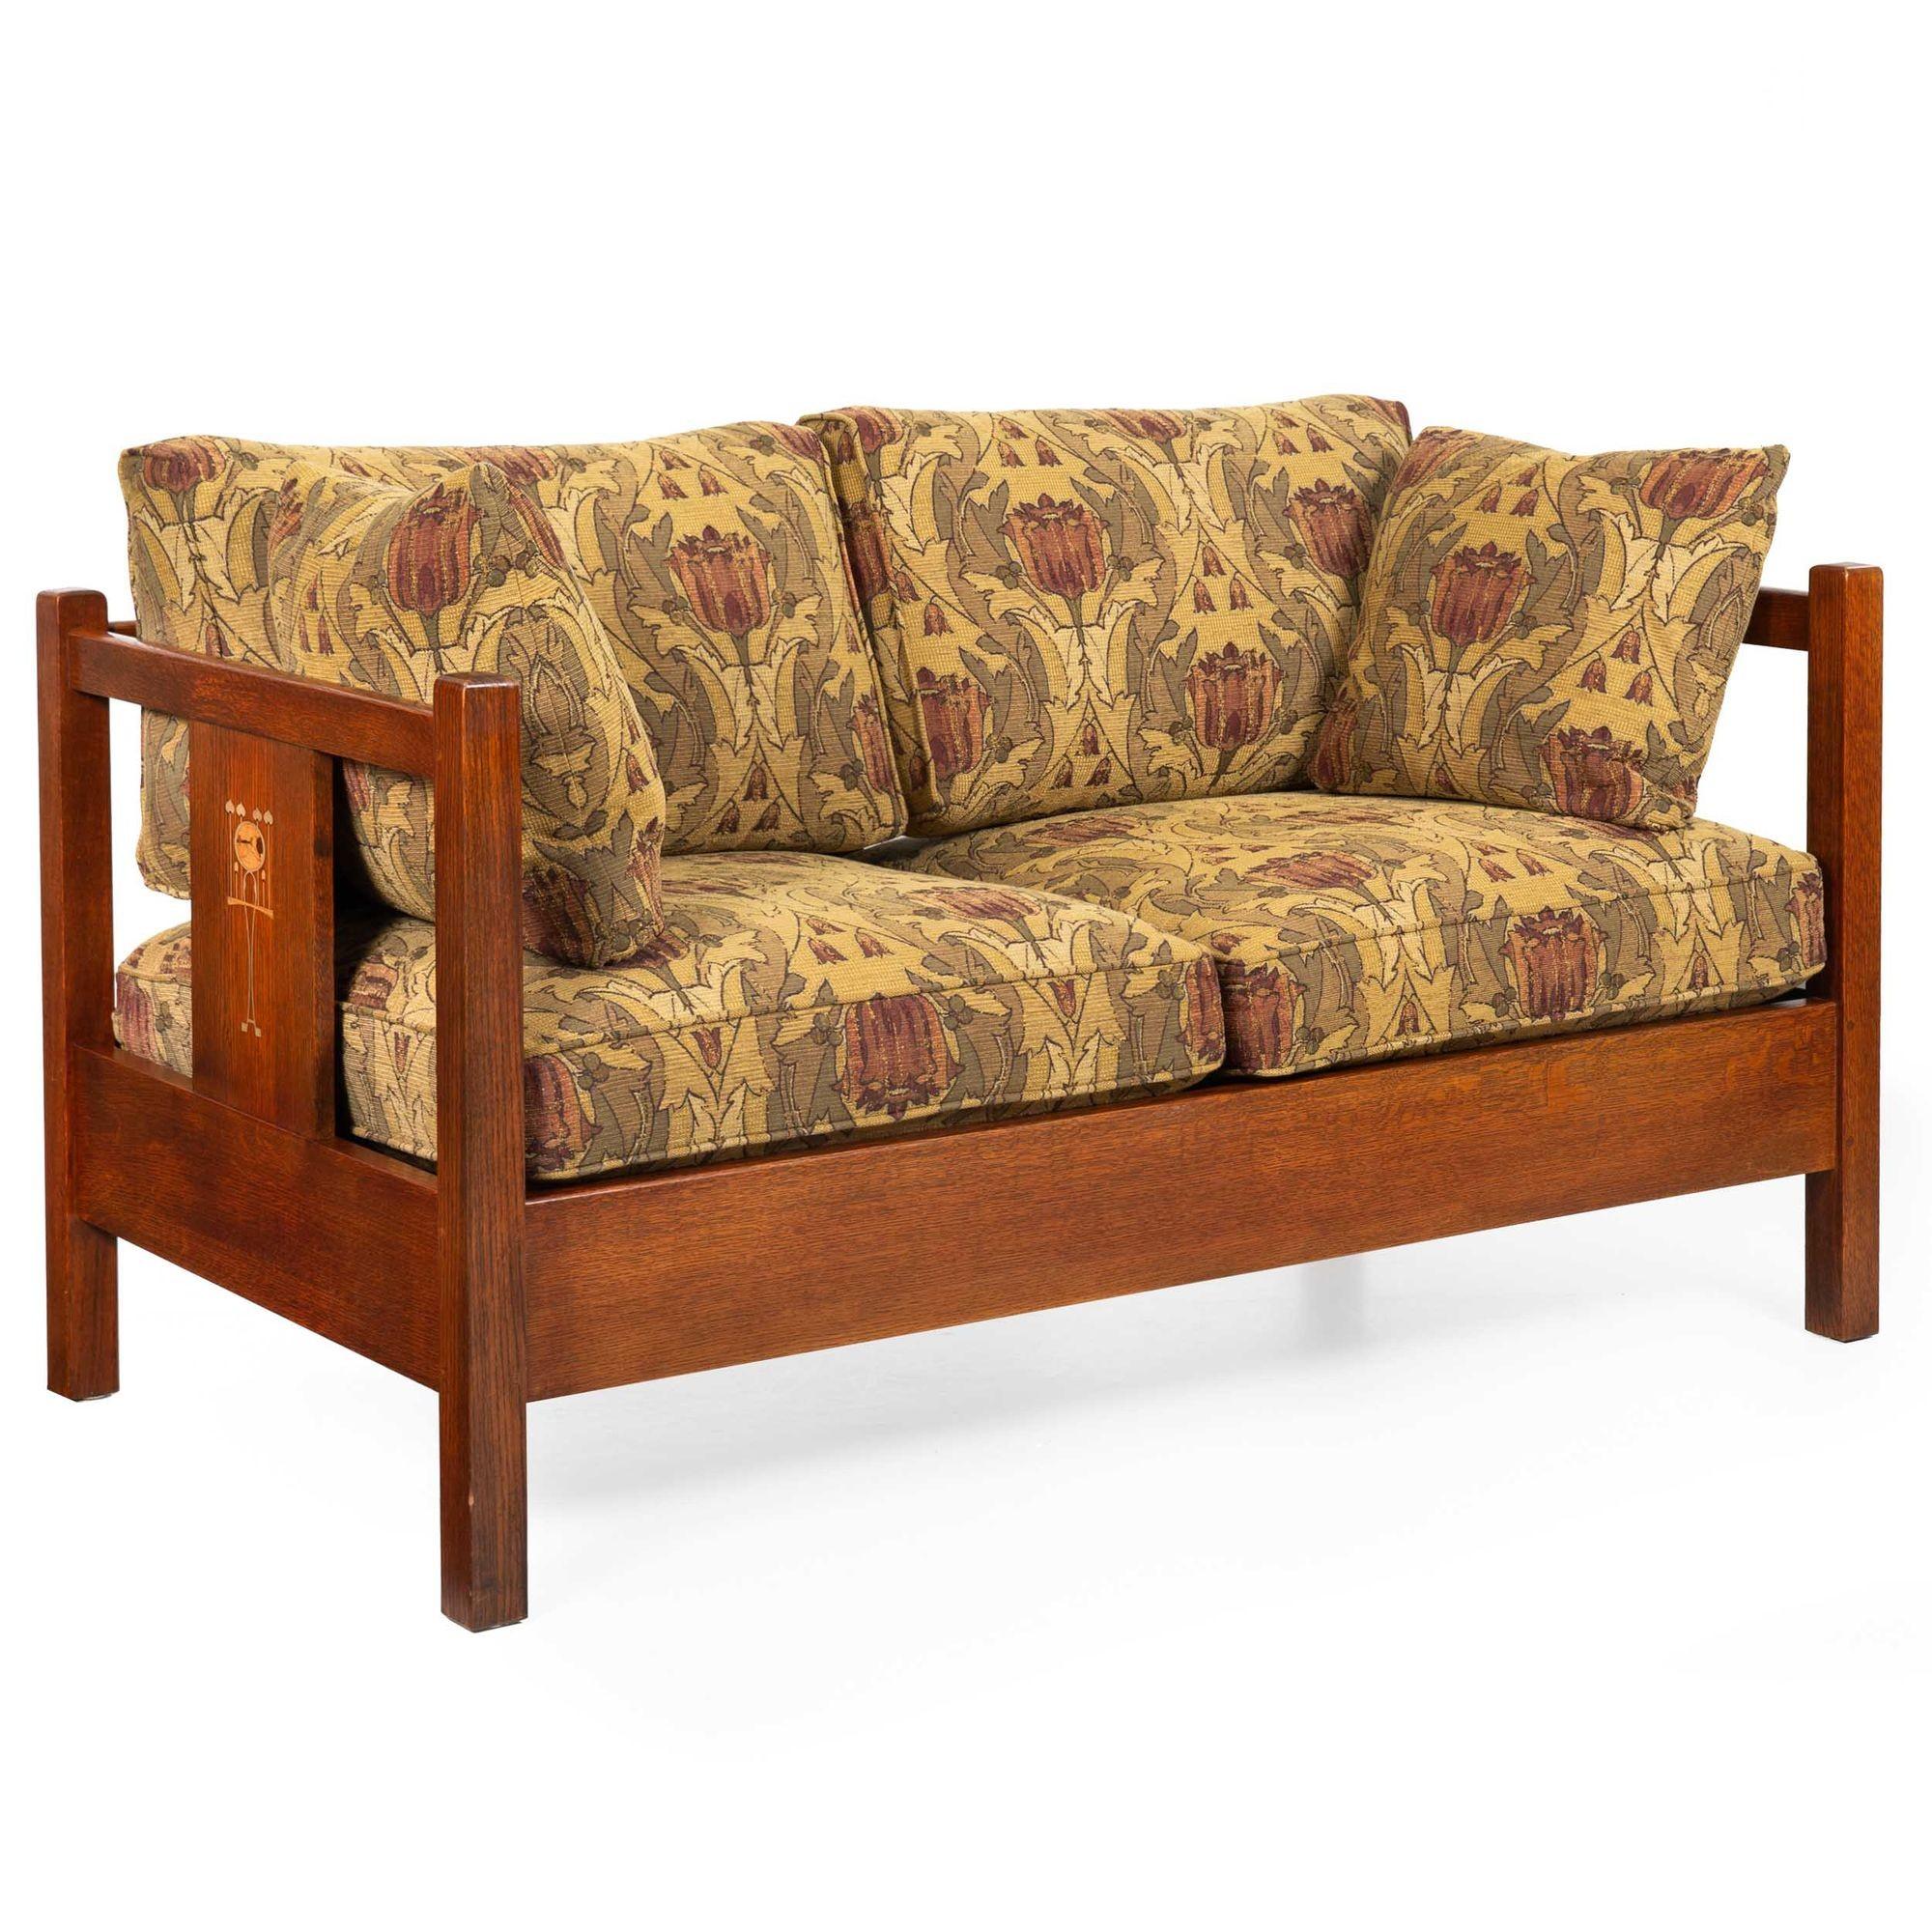 An incredibly well-made solid oak Mission loveseat by Stickley from their 